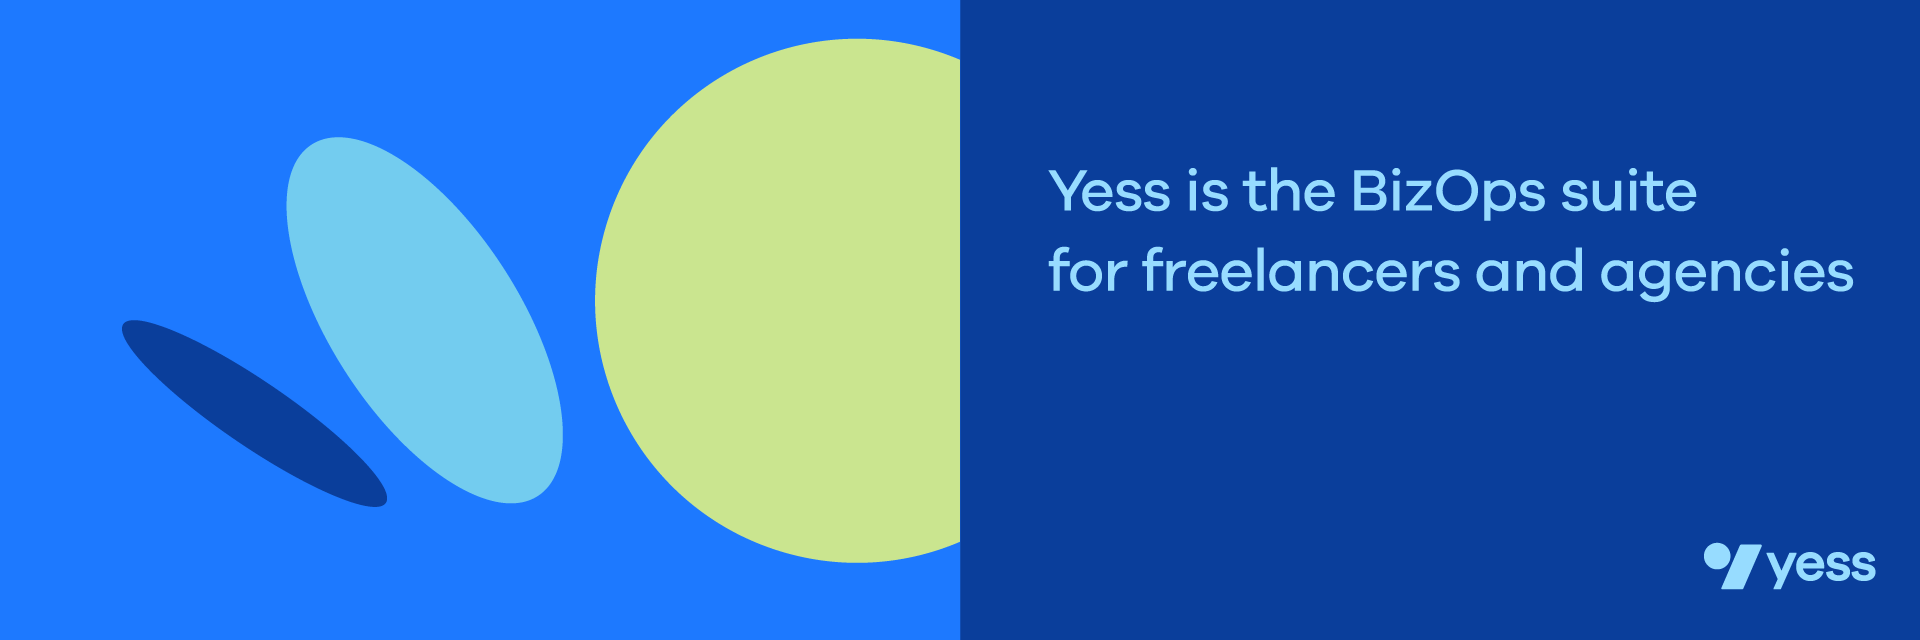 Yess is the BizOps suite for freelancers and agencies